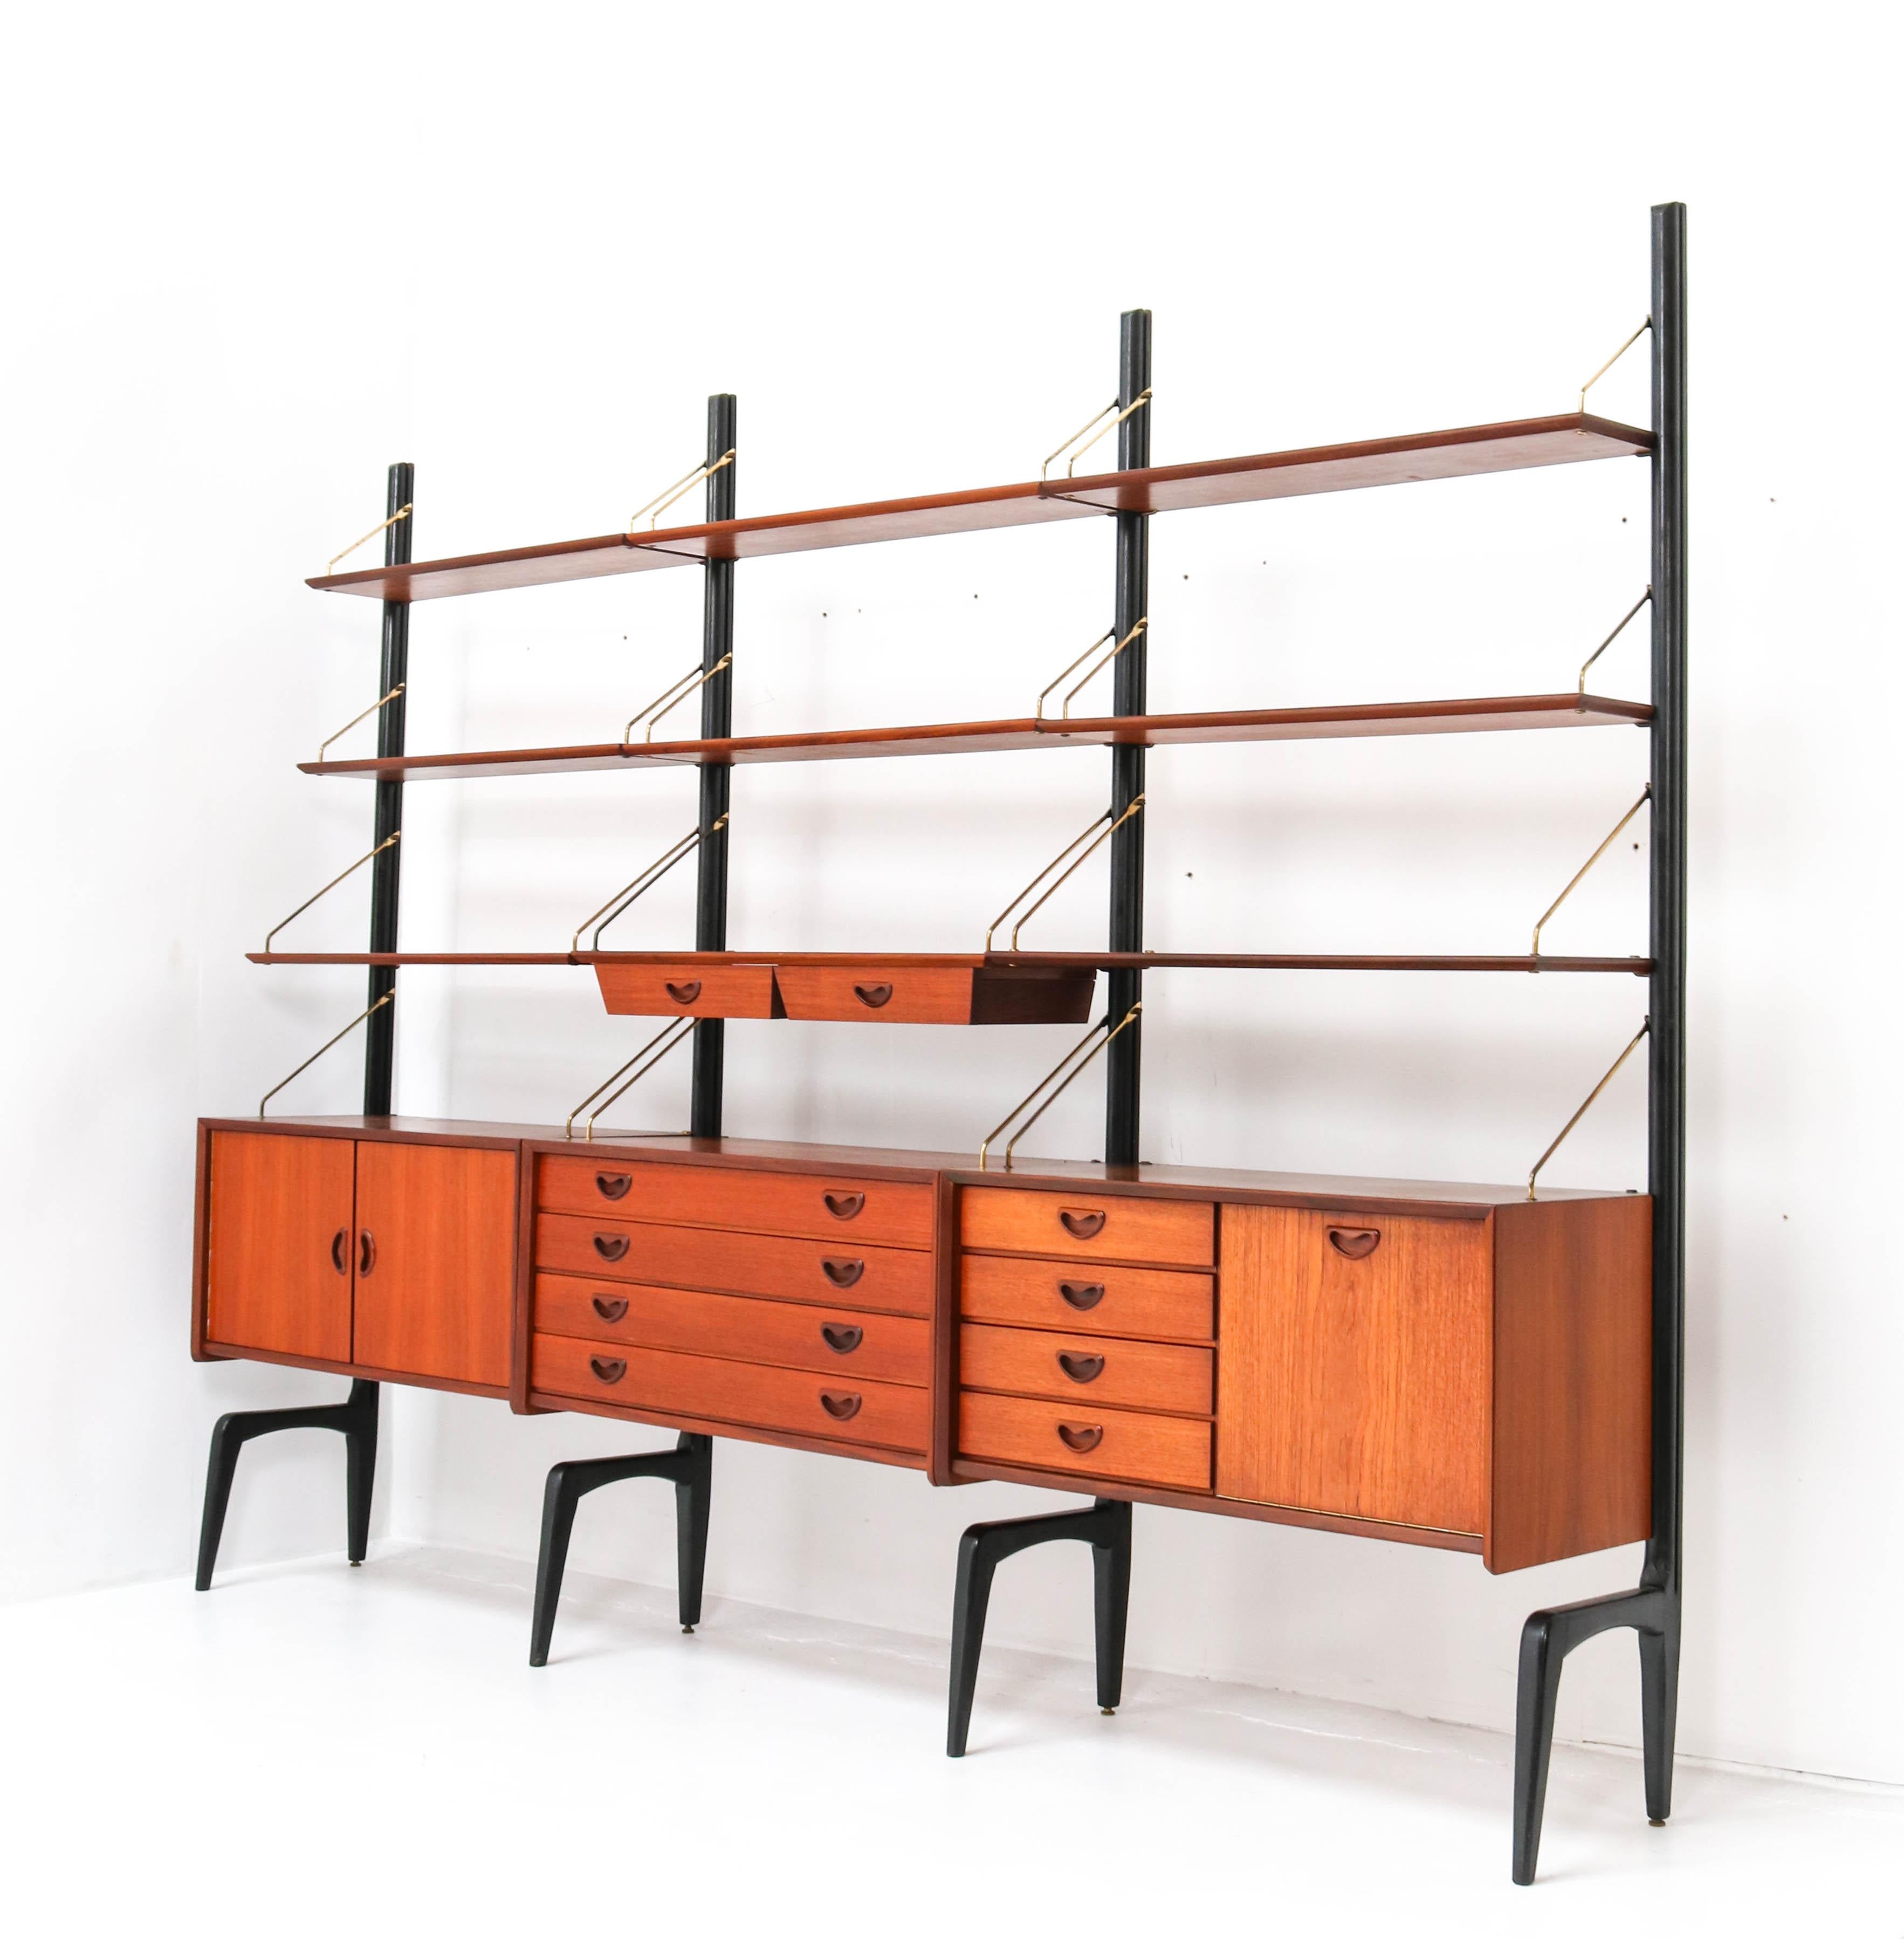 Lacquered Teak Mid-Century Modern Free Standing Wall Unit by Louis van Teeffelen for Webe